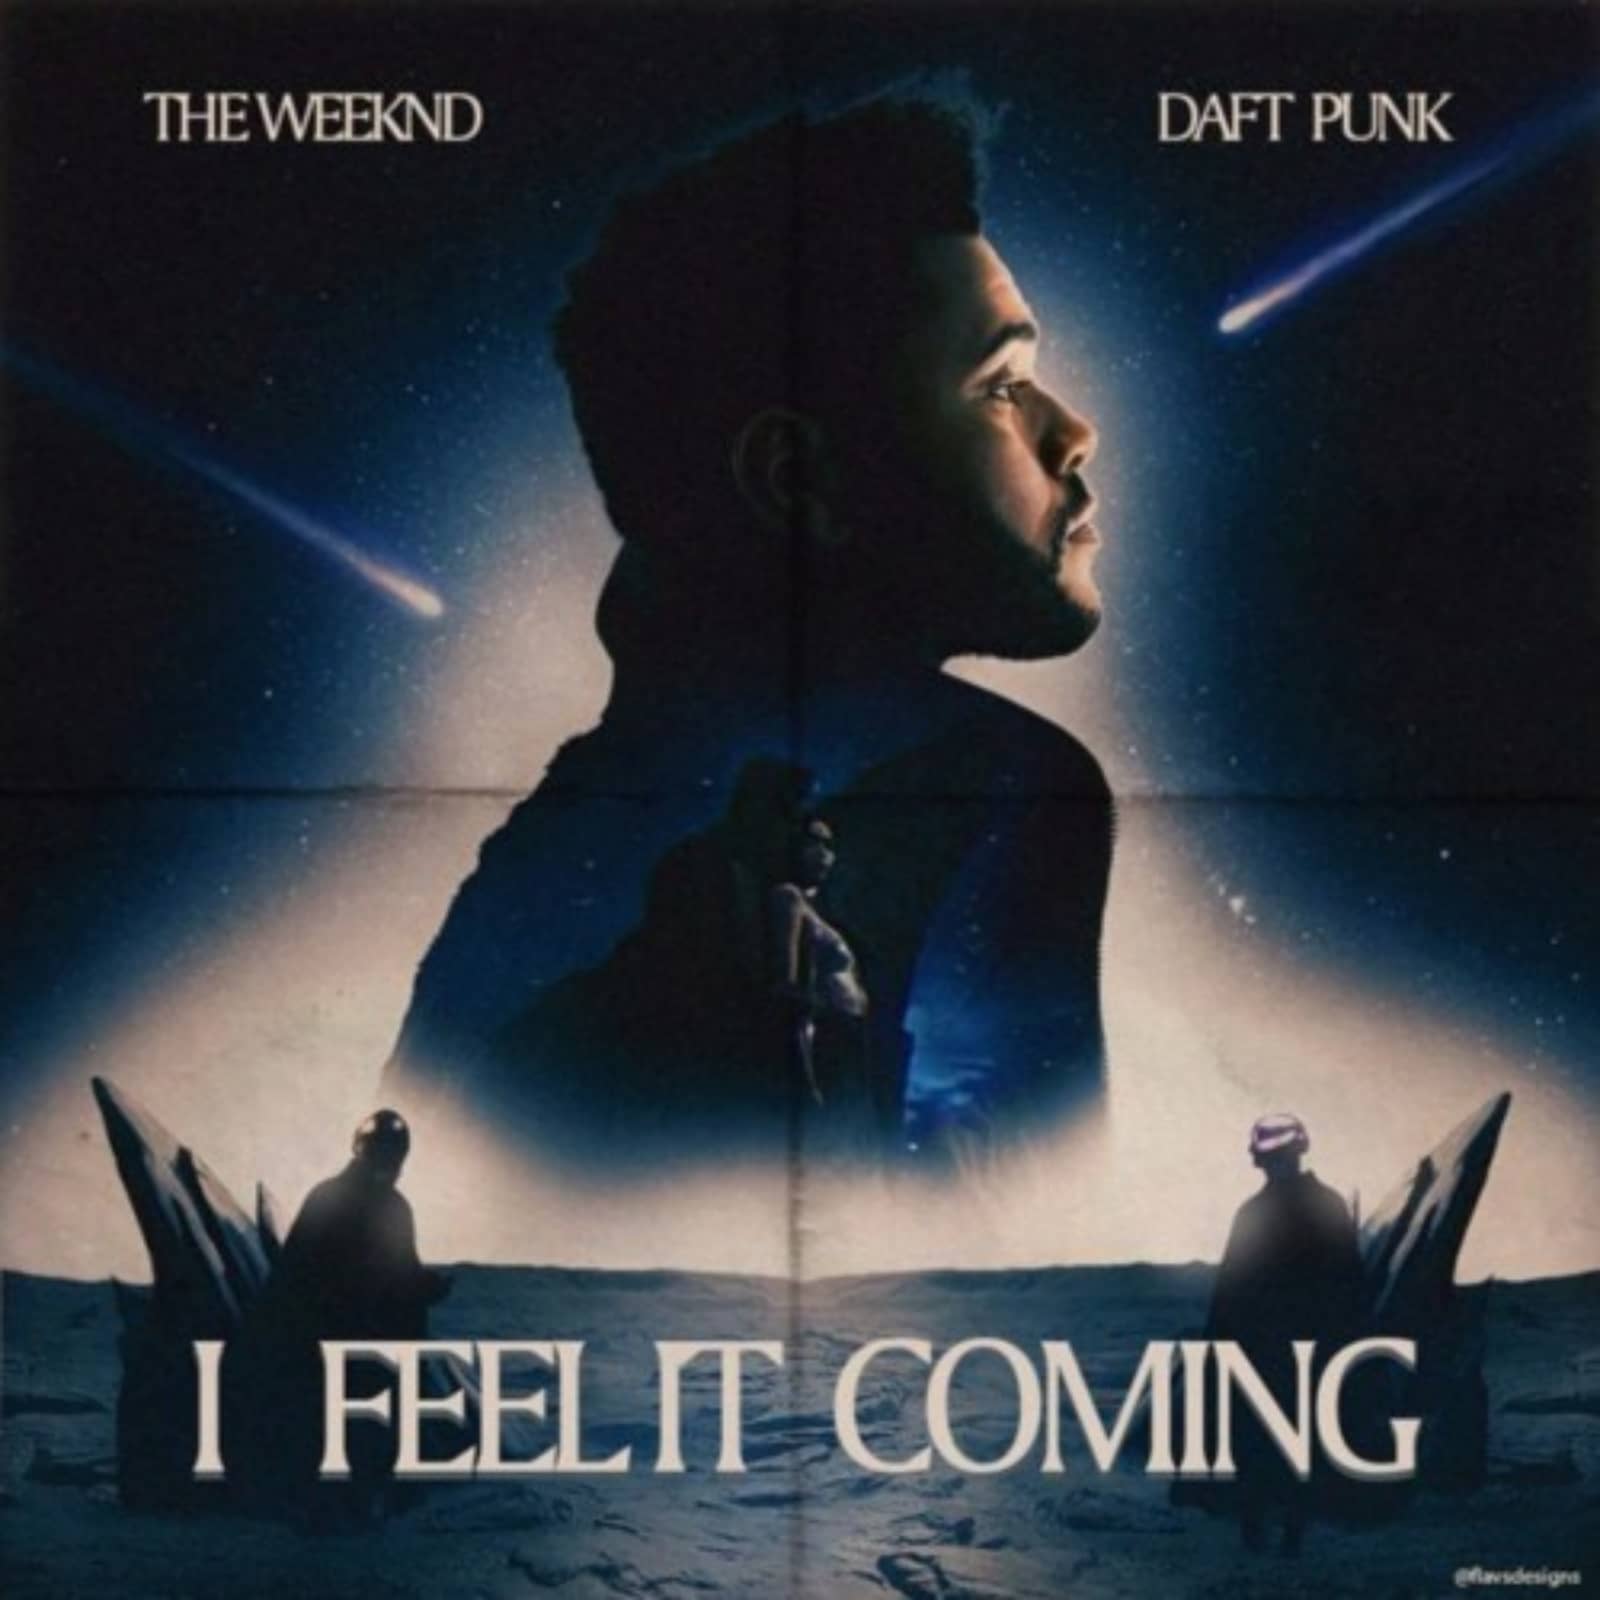 Feeling coming down. I feel it coming the Weeknd. The Weeknd Daft Punk i feel it coming. The weekend Daft Punk. Weeknd feel it coming.